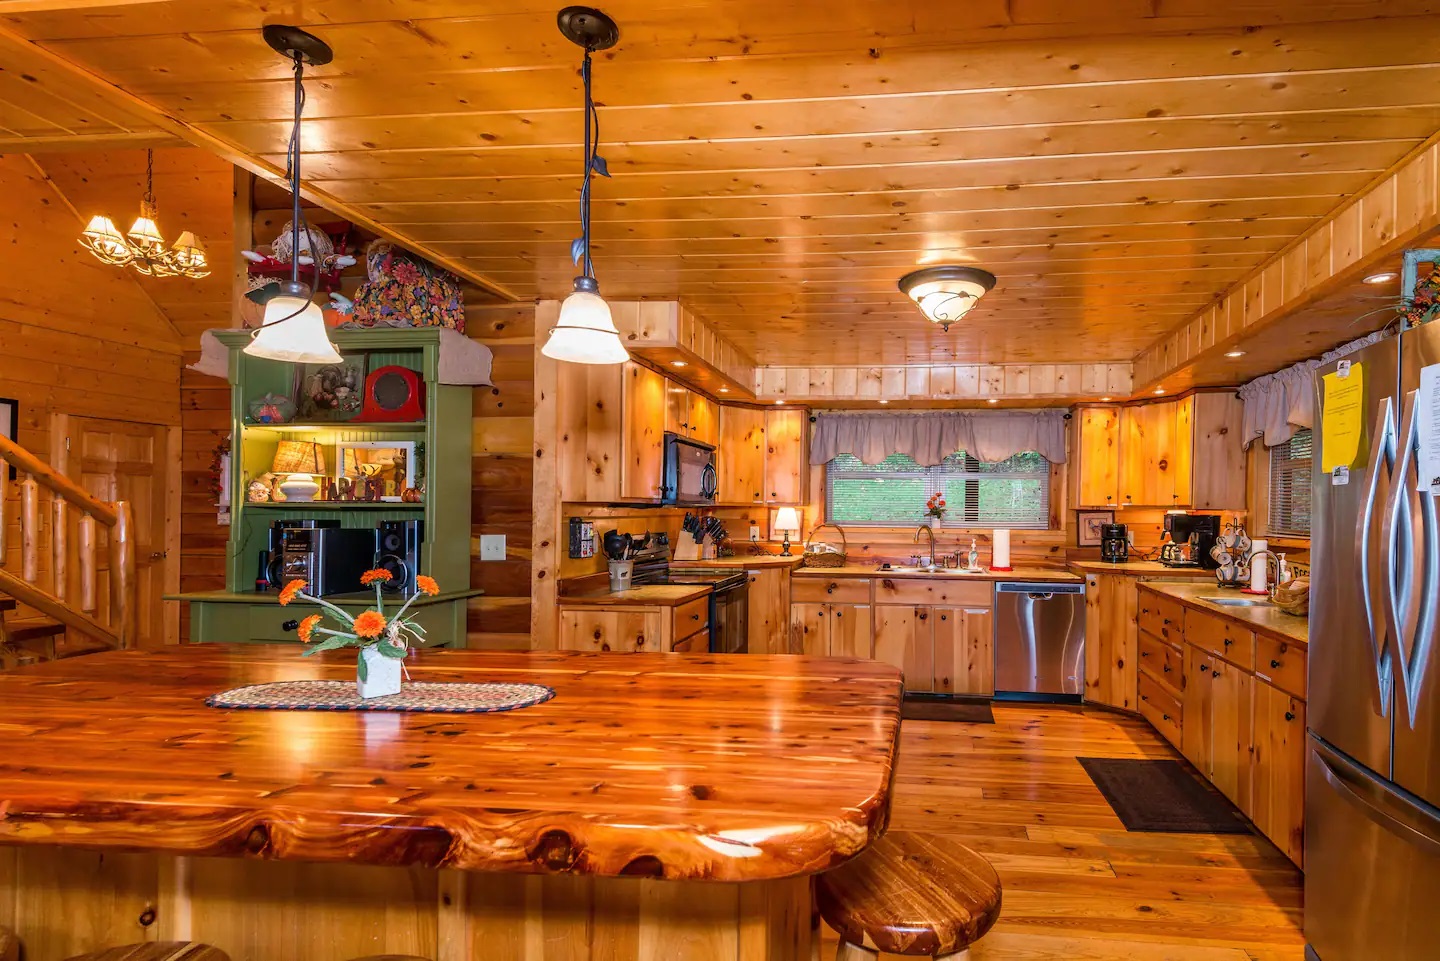 Fairytale Log Cabin kitchen made of wood with green cabinet